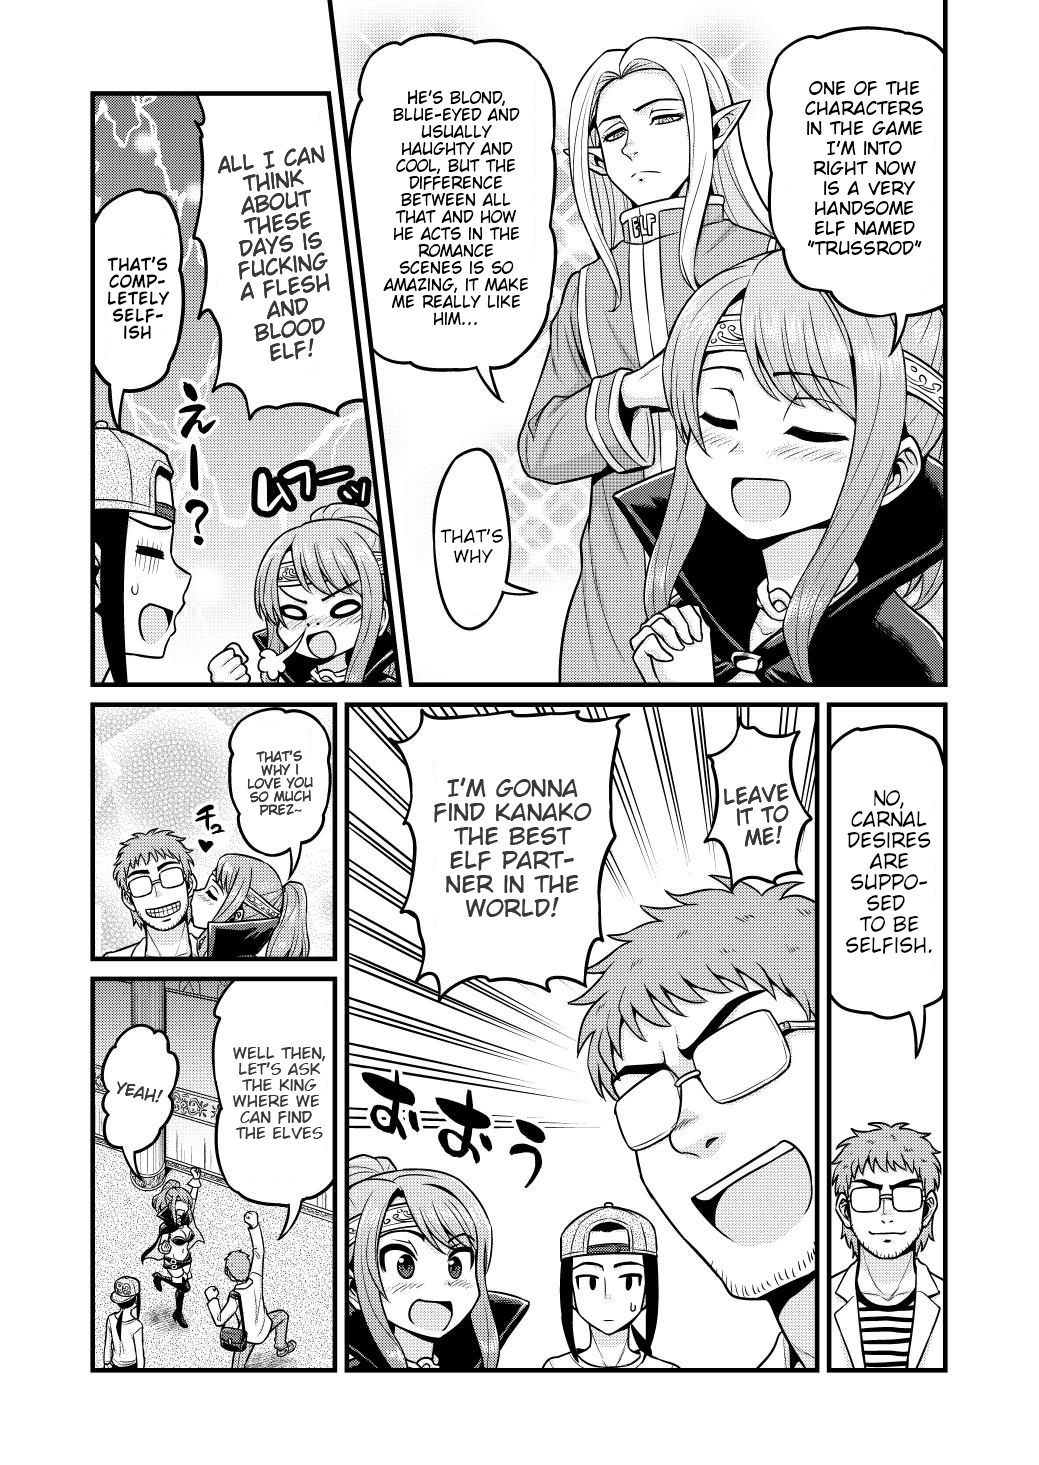 Filming Adult Videos in Another World - Chapter 3 Page 5